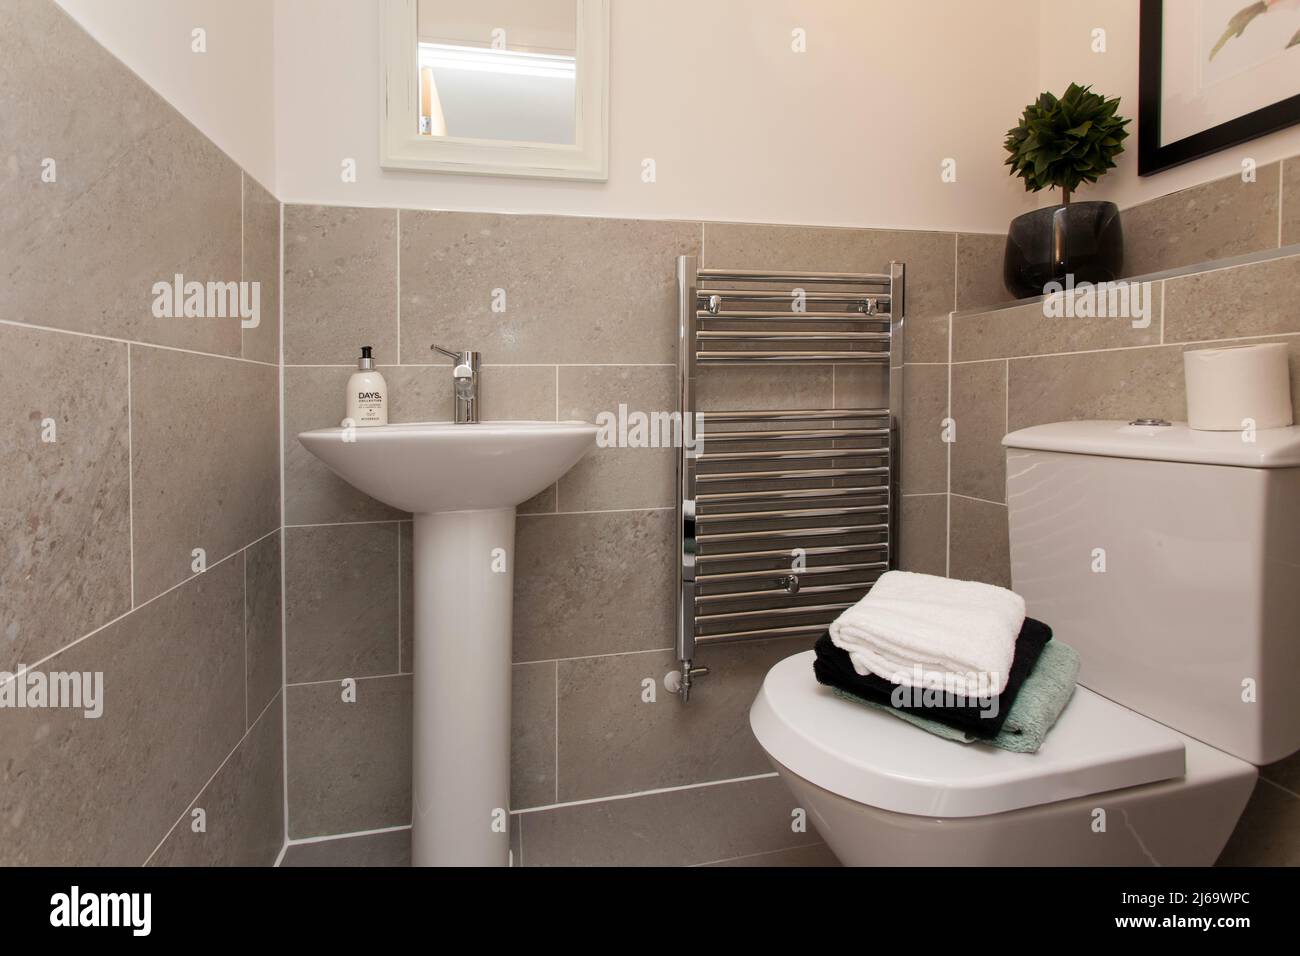 Toilet and washbasin, downstairs loo, modern new build house, tiled in neutral colours Stock Photo